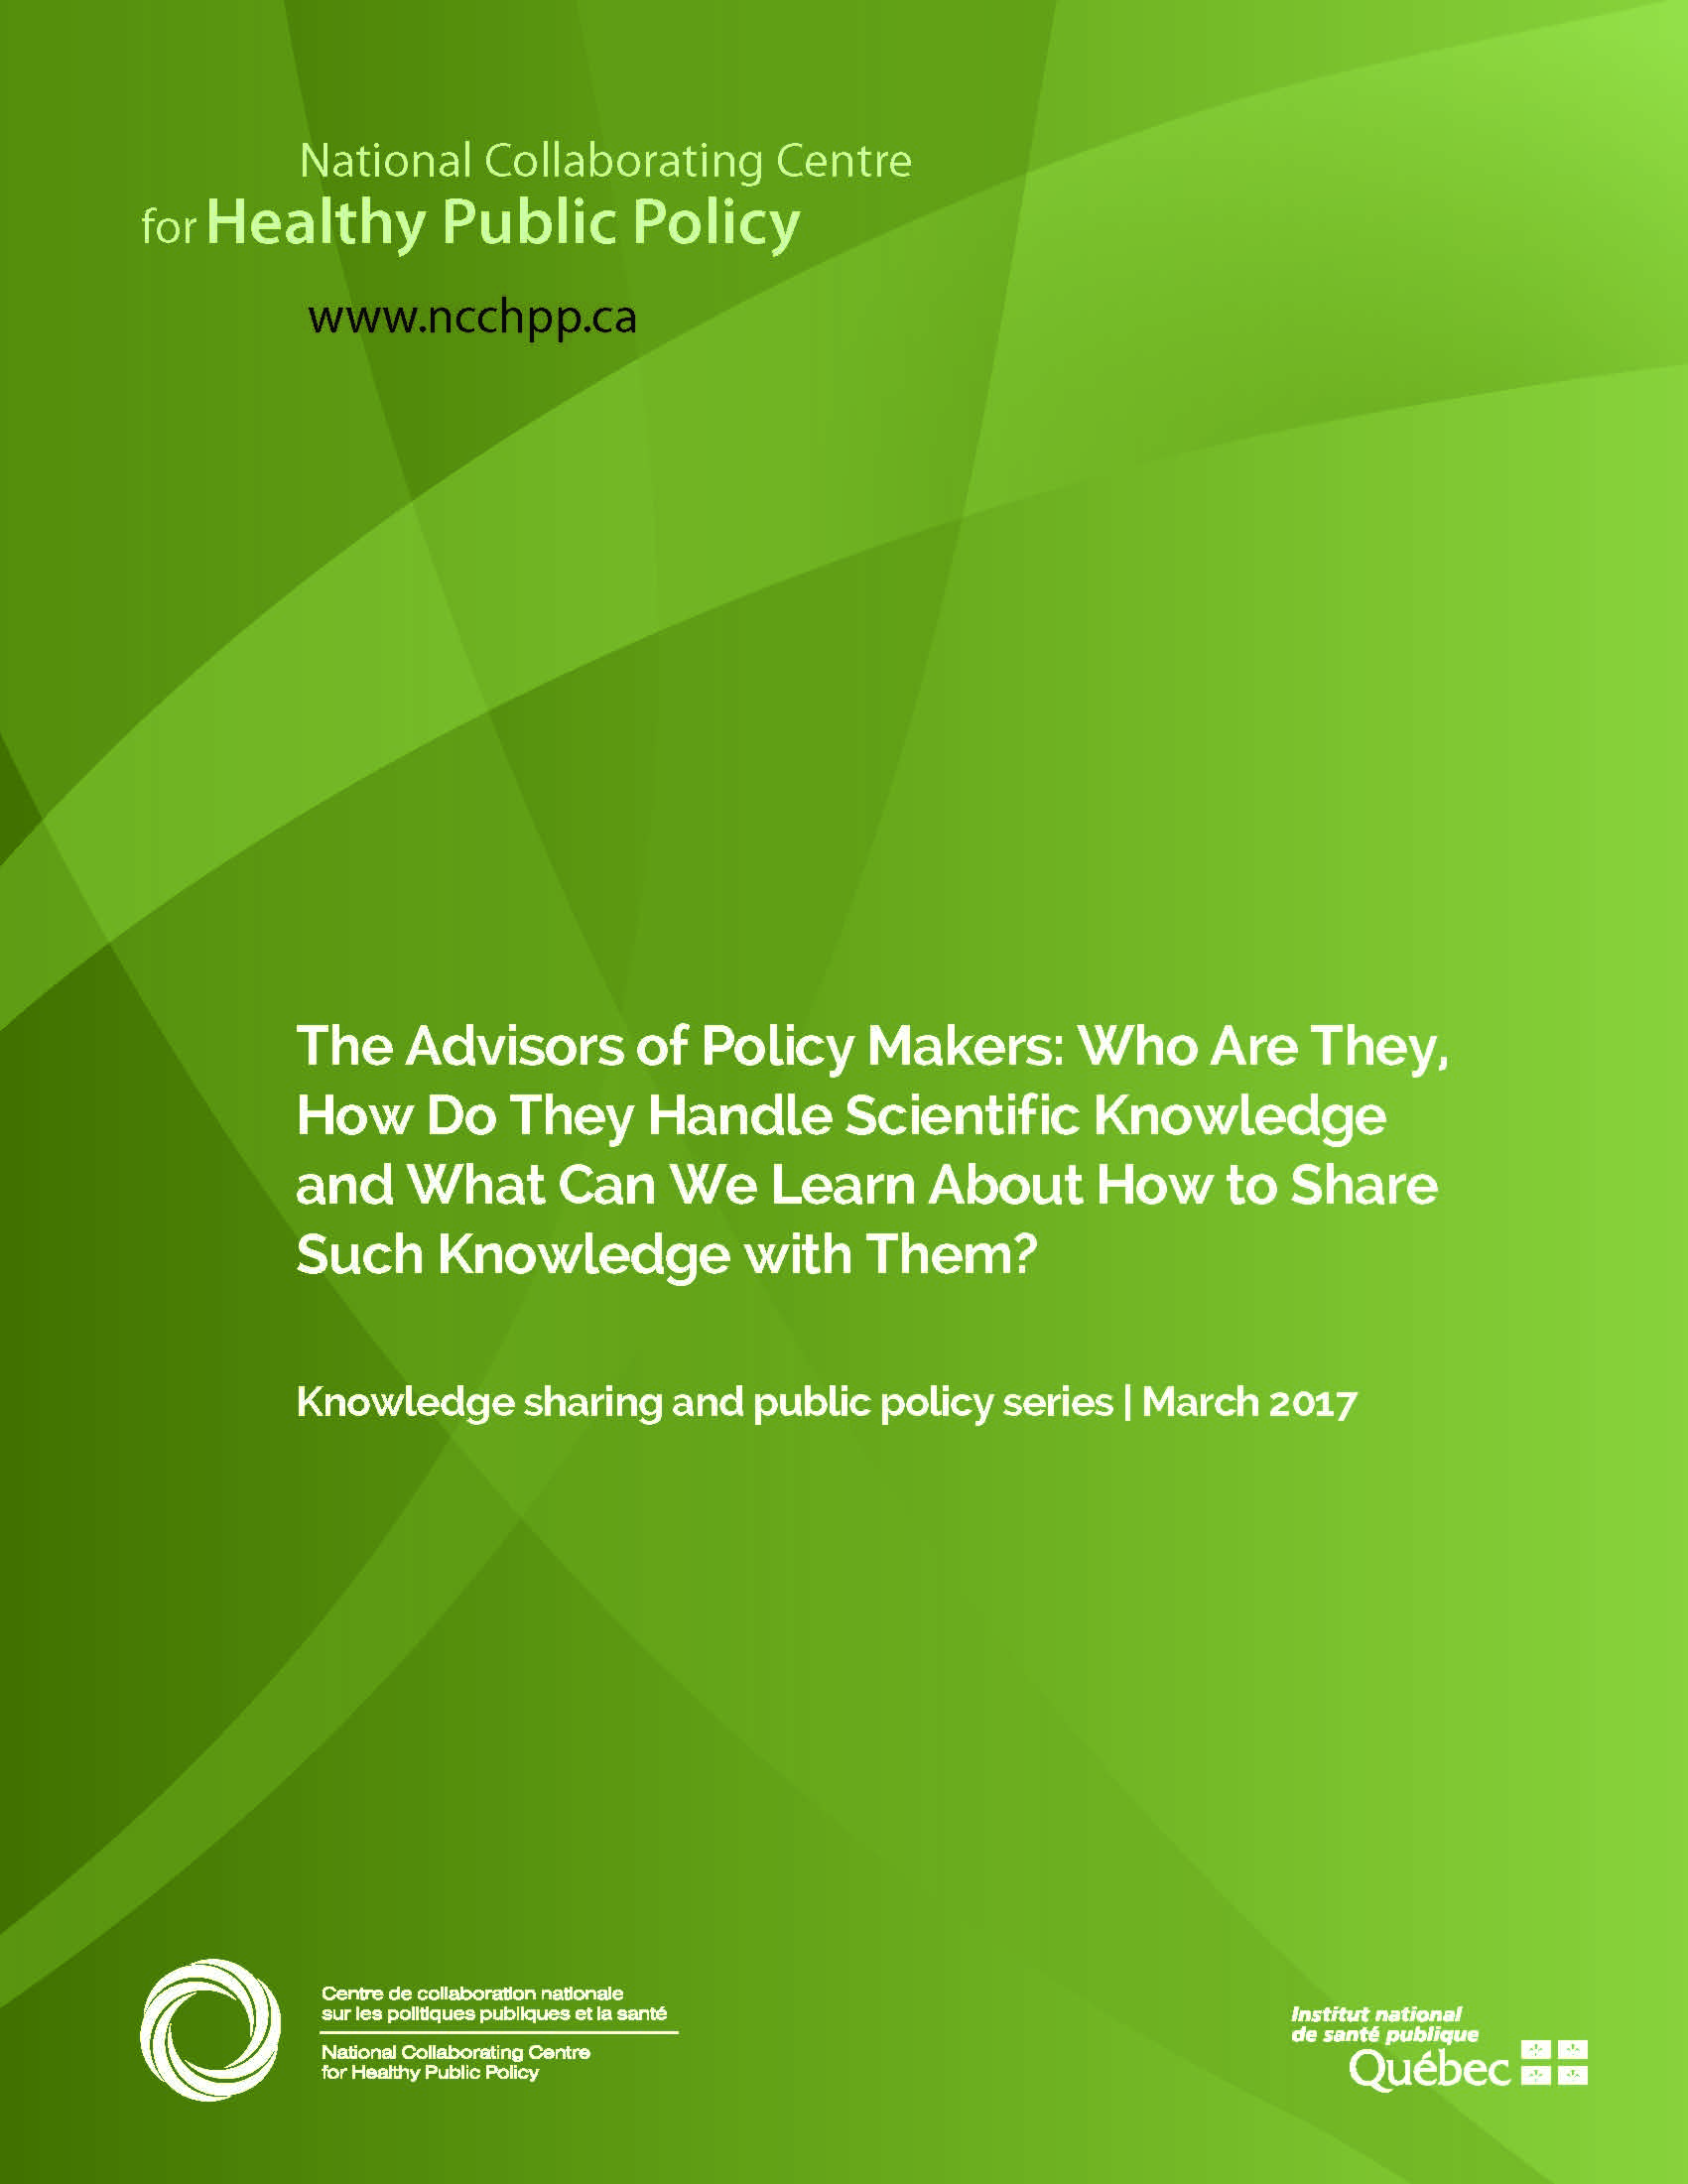 The Advisors of Policy Makers: Who Are They, How Do They Handle Scientific Knowledge and What Can We Learn About How to Share Such Knowledge with Them?